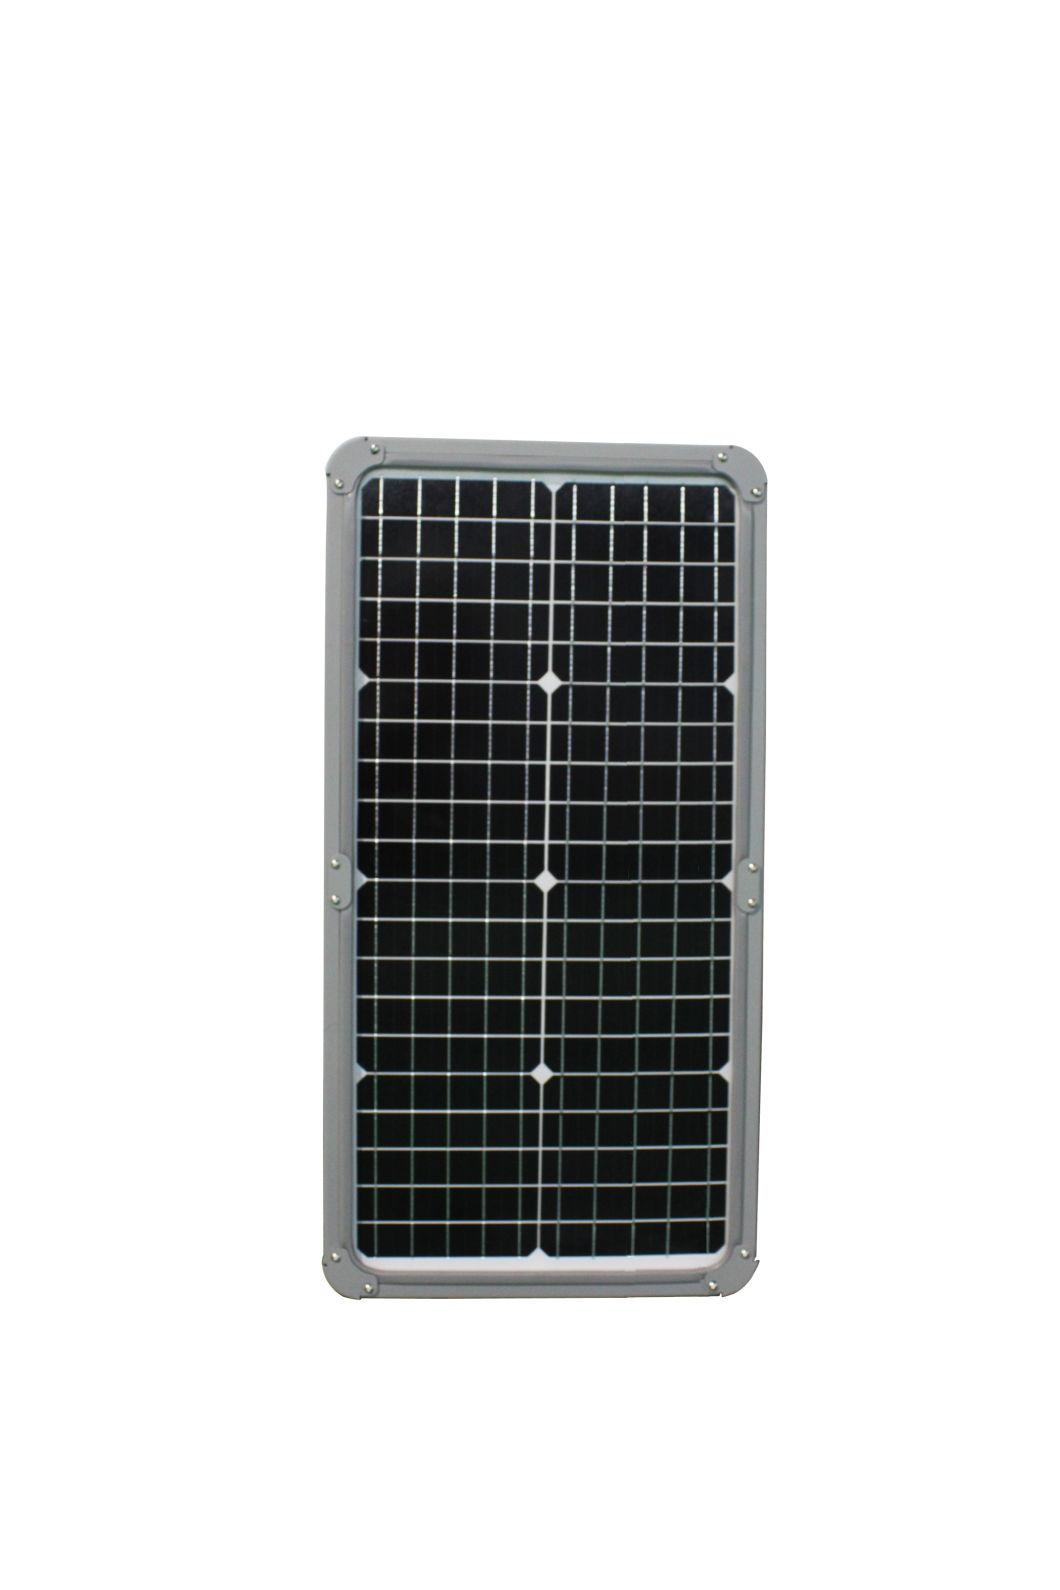 Aluminium All in One Integrated Solar LED Street Light 80W for Outdoor District